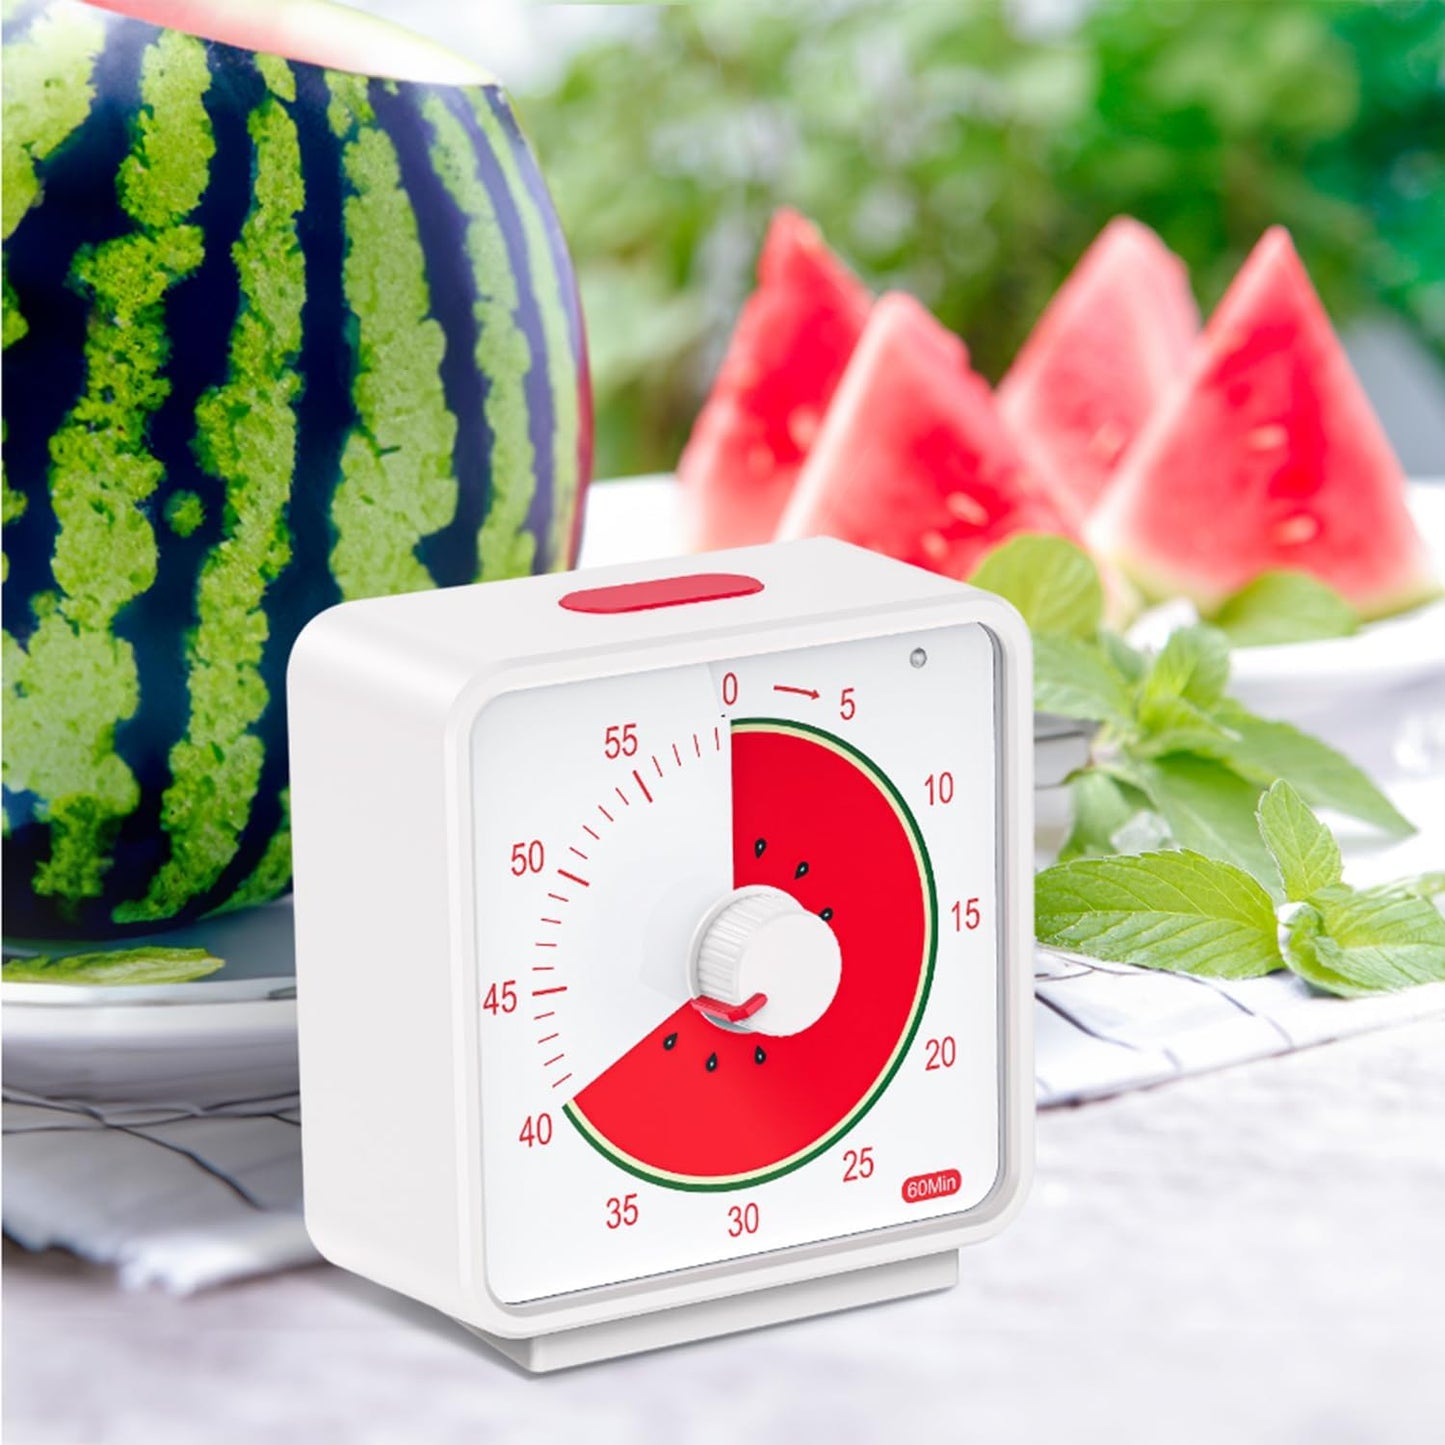 60 Minute Children's Visual Timer,Countdown Timer for Class and Kitchen,Learn Desktop Timer,Time Management Tool,Watermelon Pattern(Watermelon)